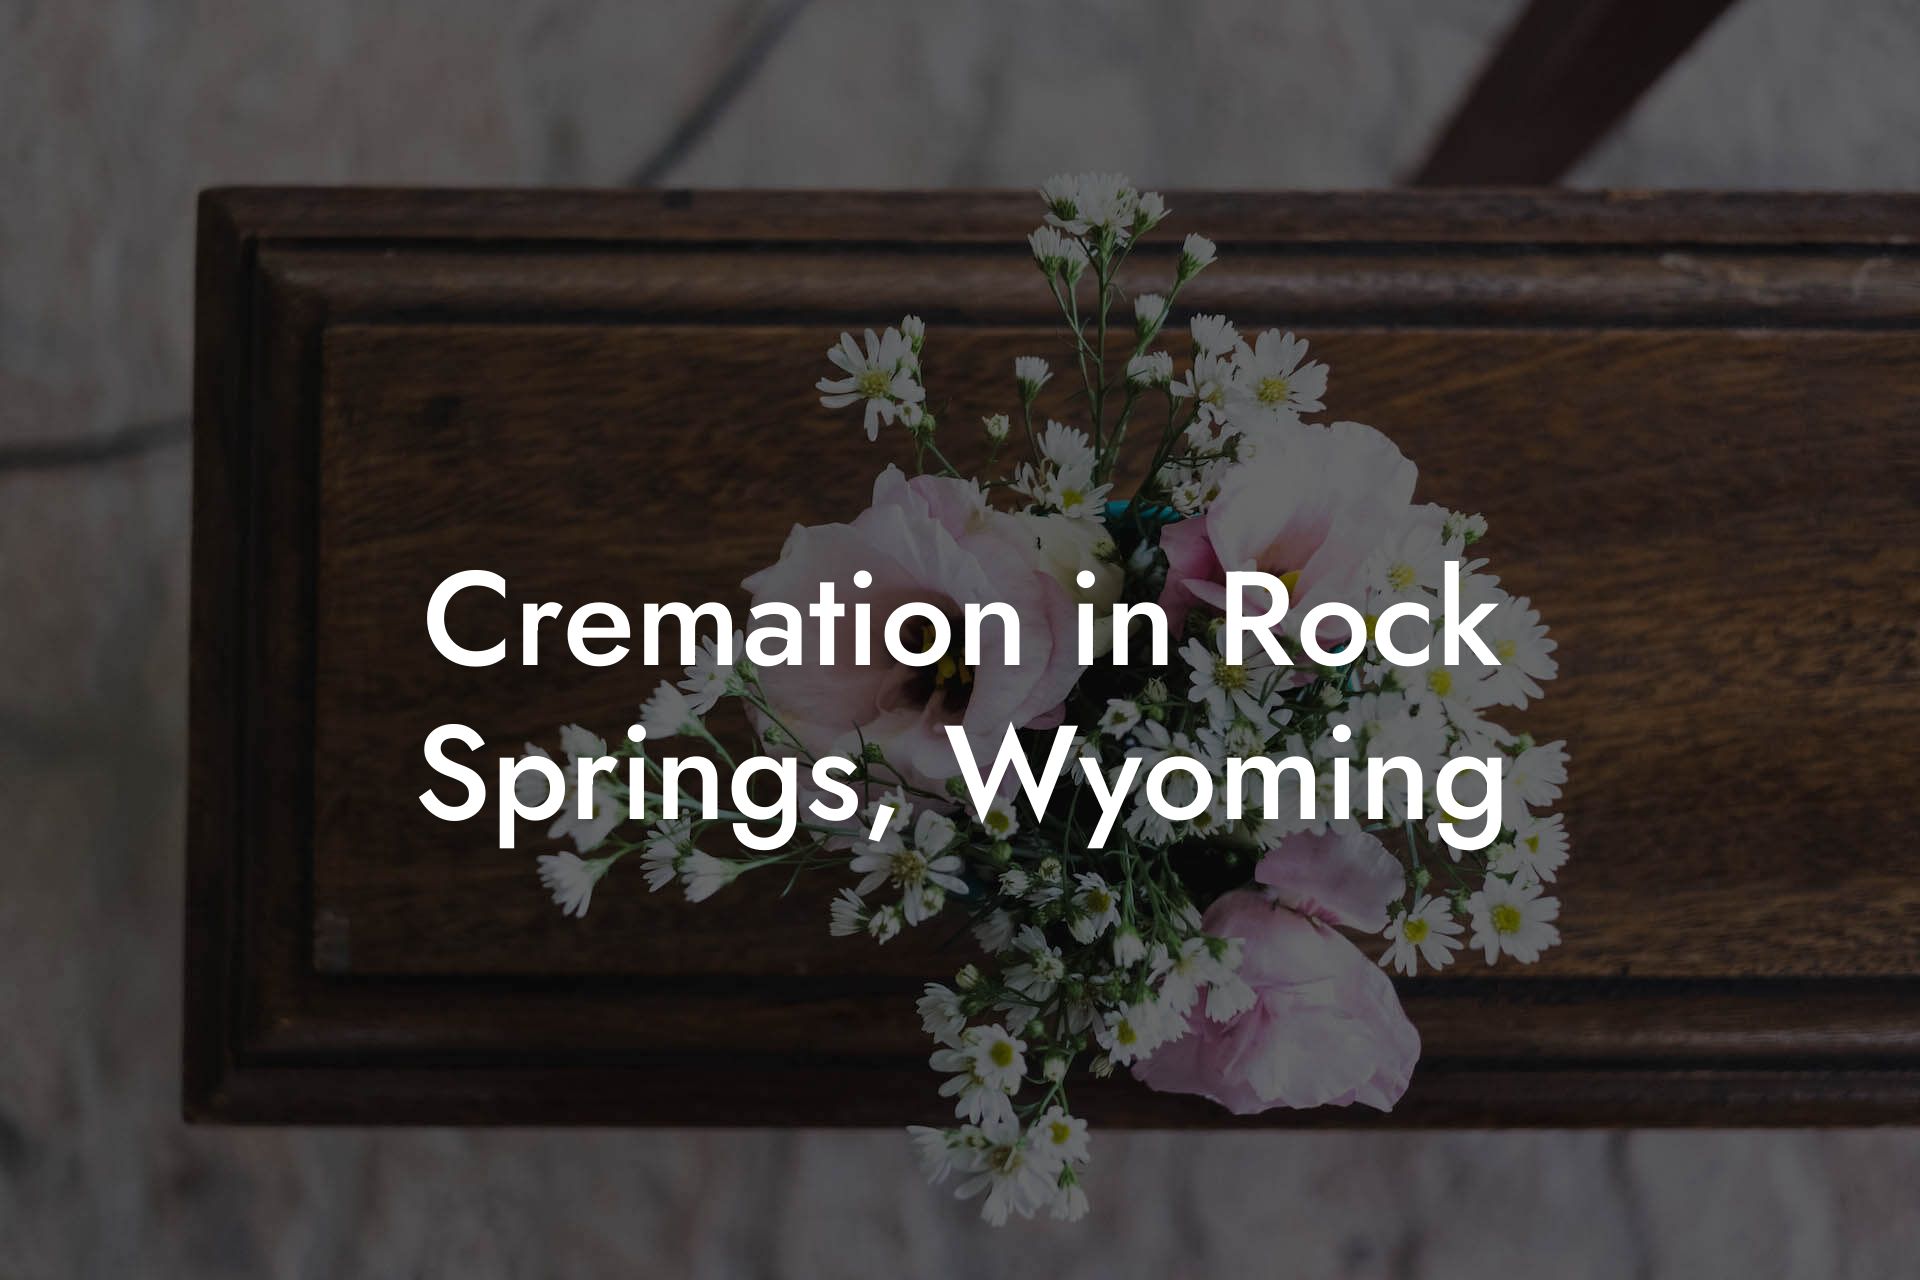 Cremation in Rock Springs, Wyoming